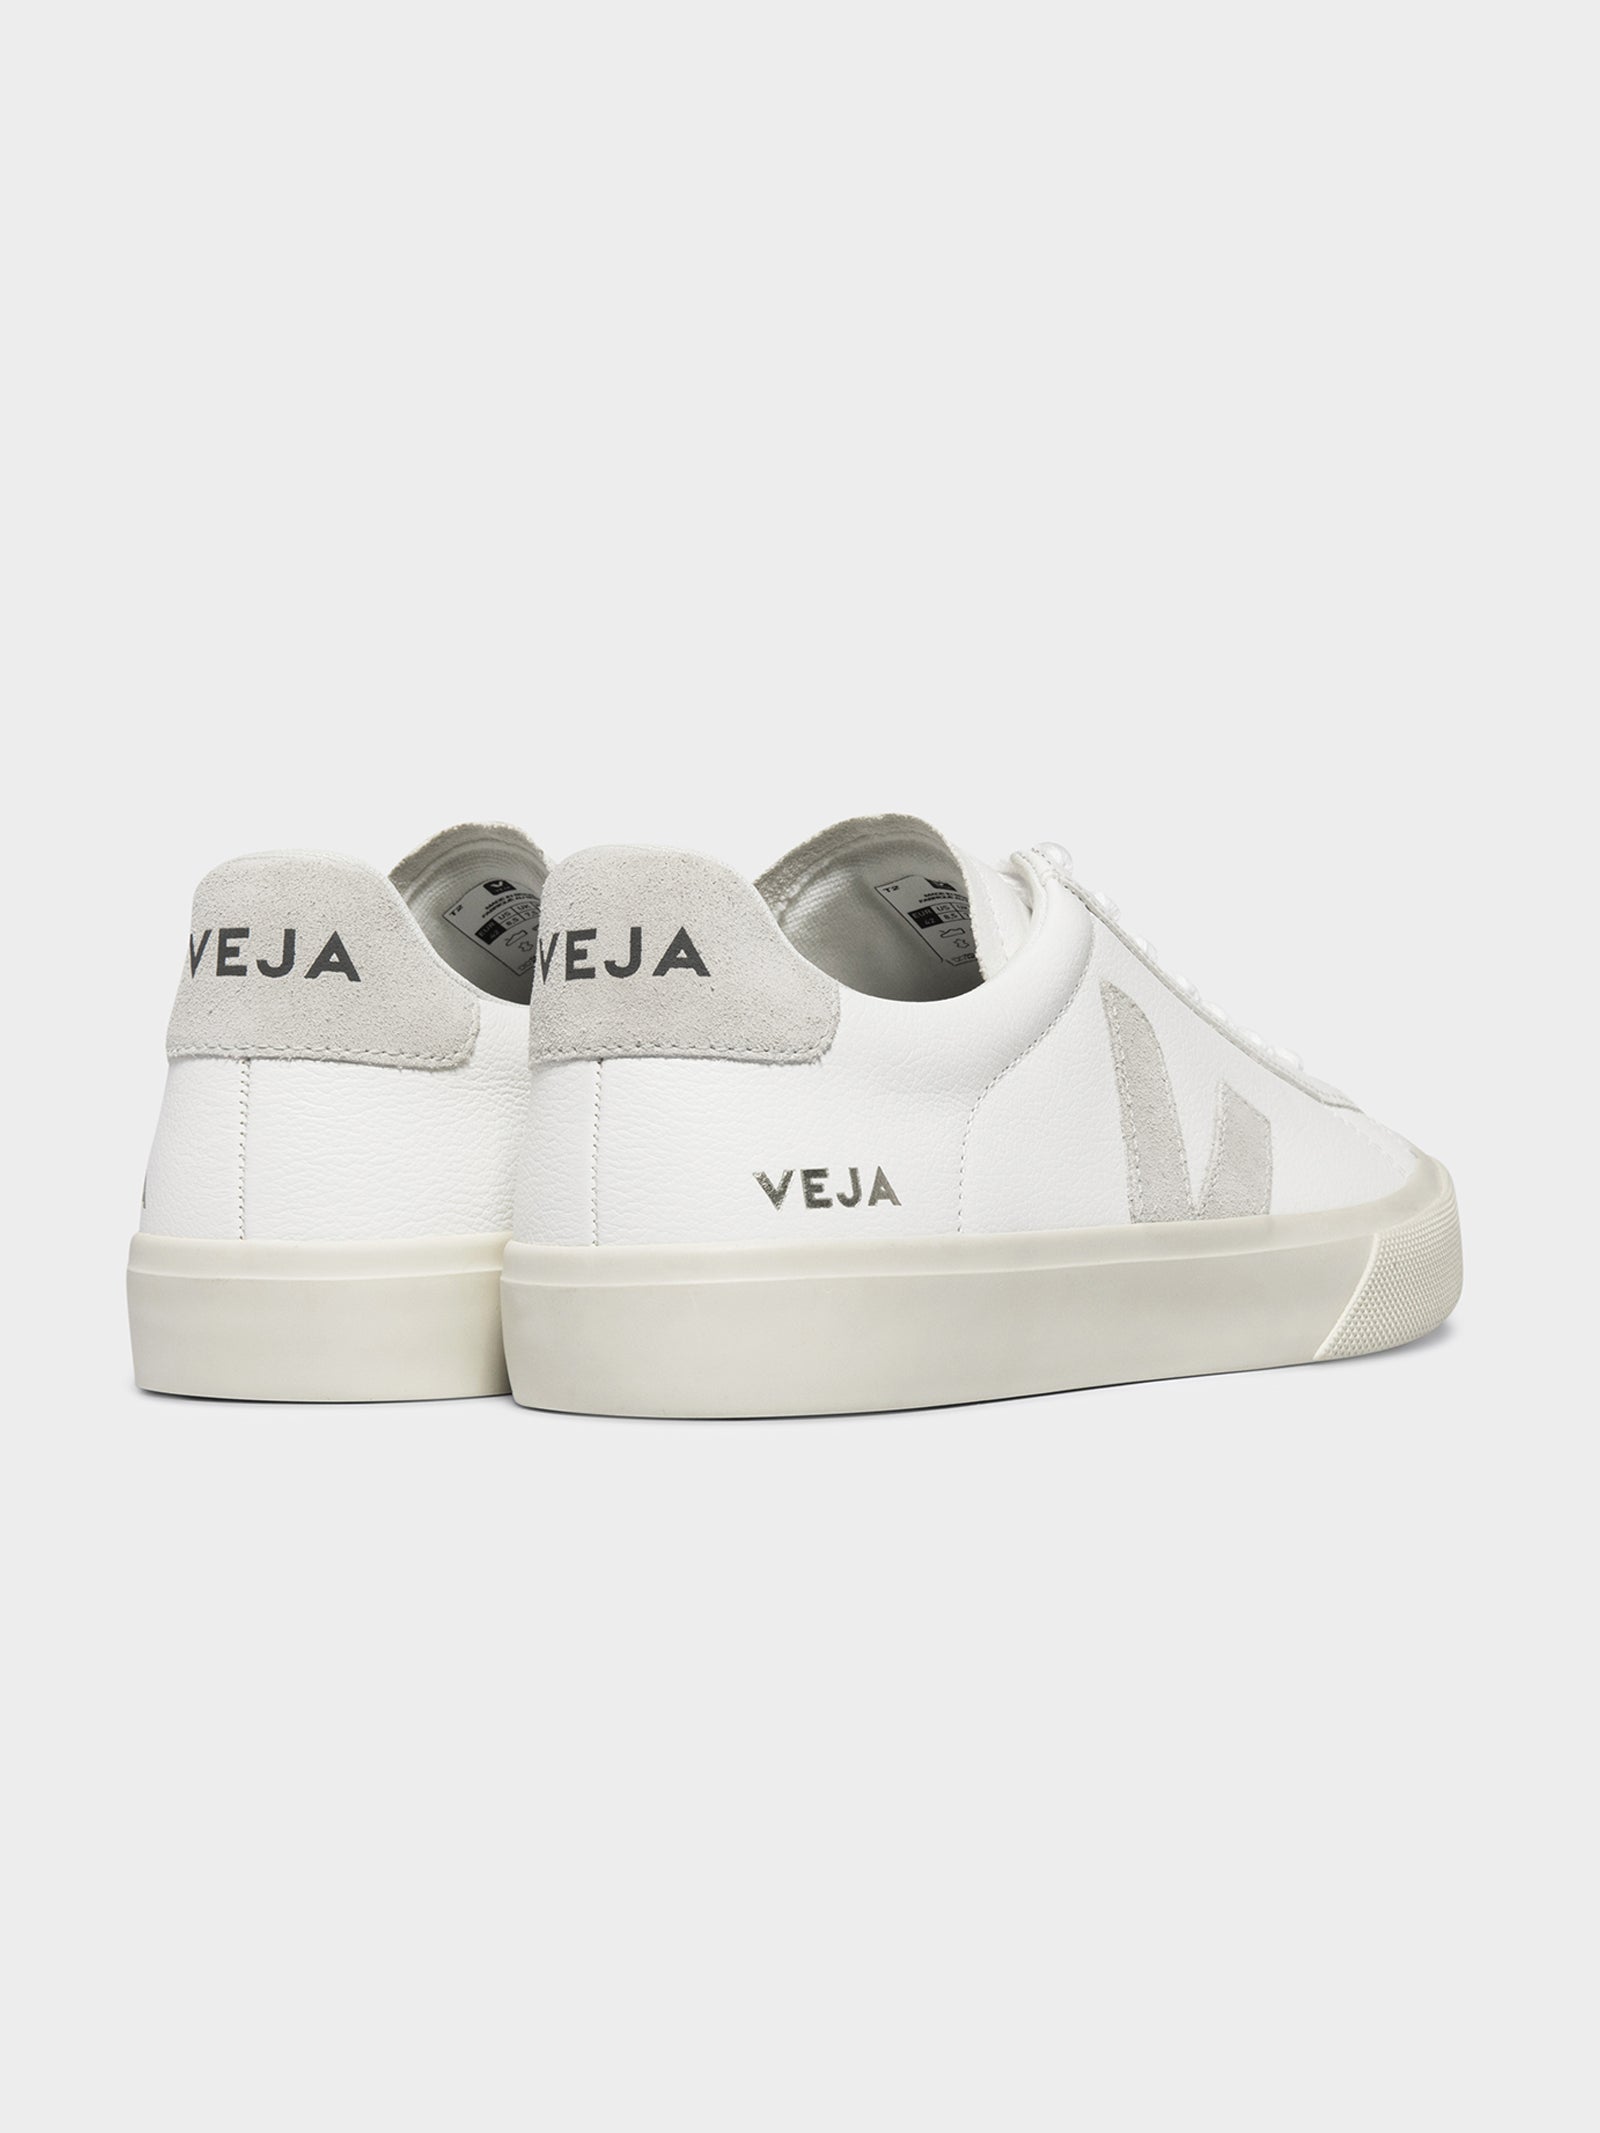 Unisex Campo Leather Sneakers in White & Beige